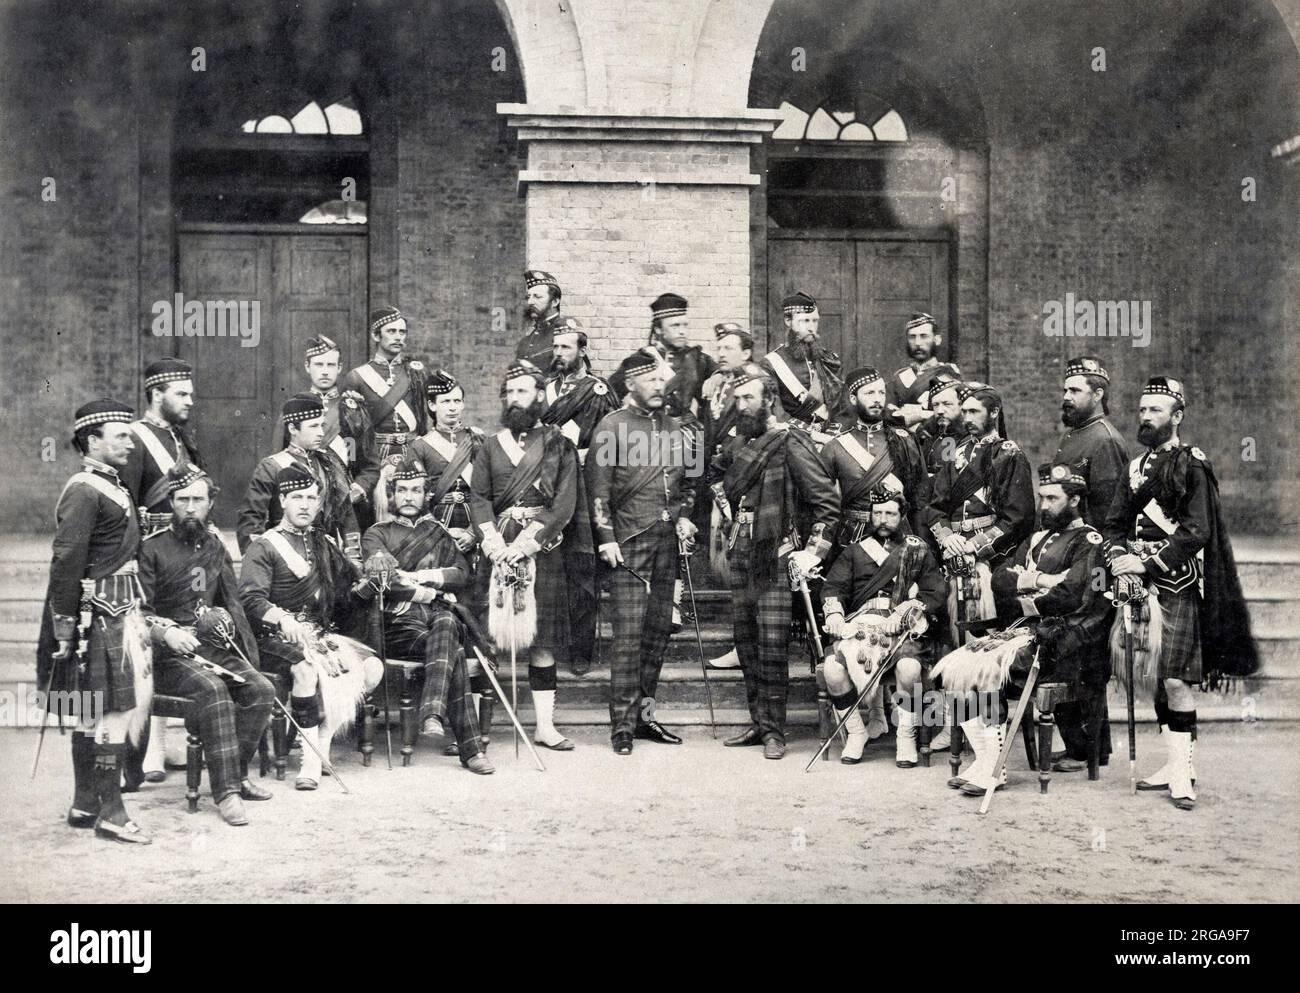 19th century vintage photograph: Officers of the 92nd Highlanders, Scottish army regiment, India, 1870 Stock Photo